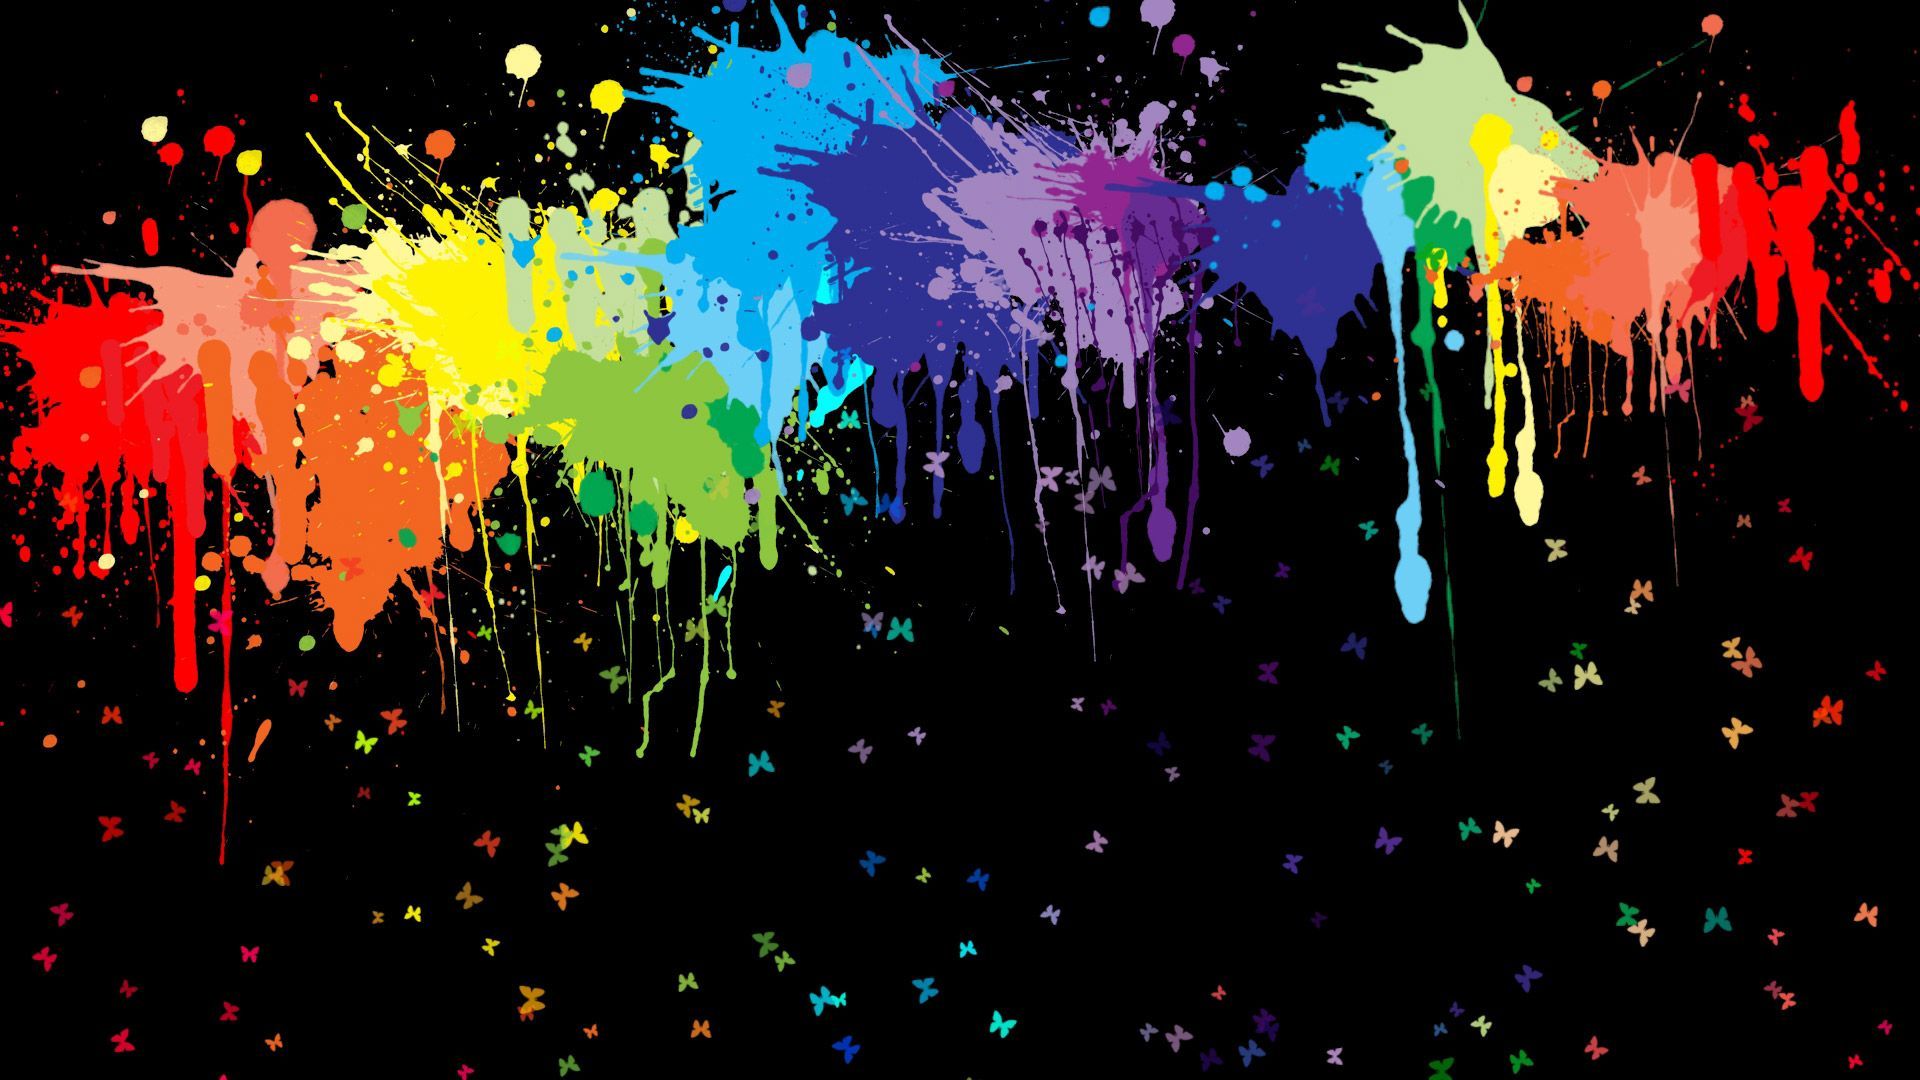 hd wallpaper colorful abstract | wallpapers55.com - Best ...